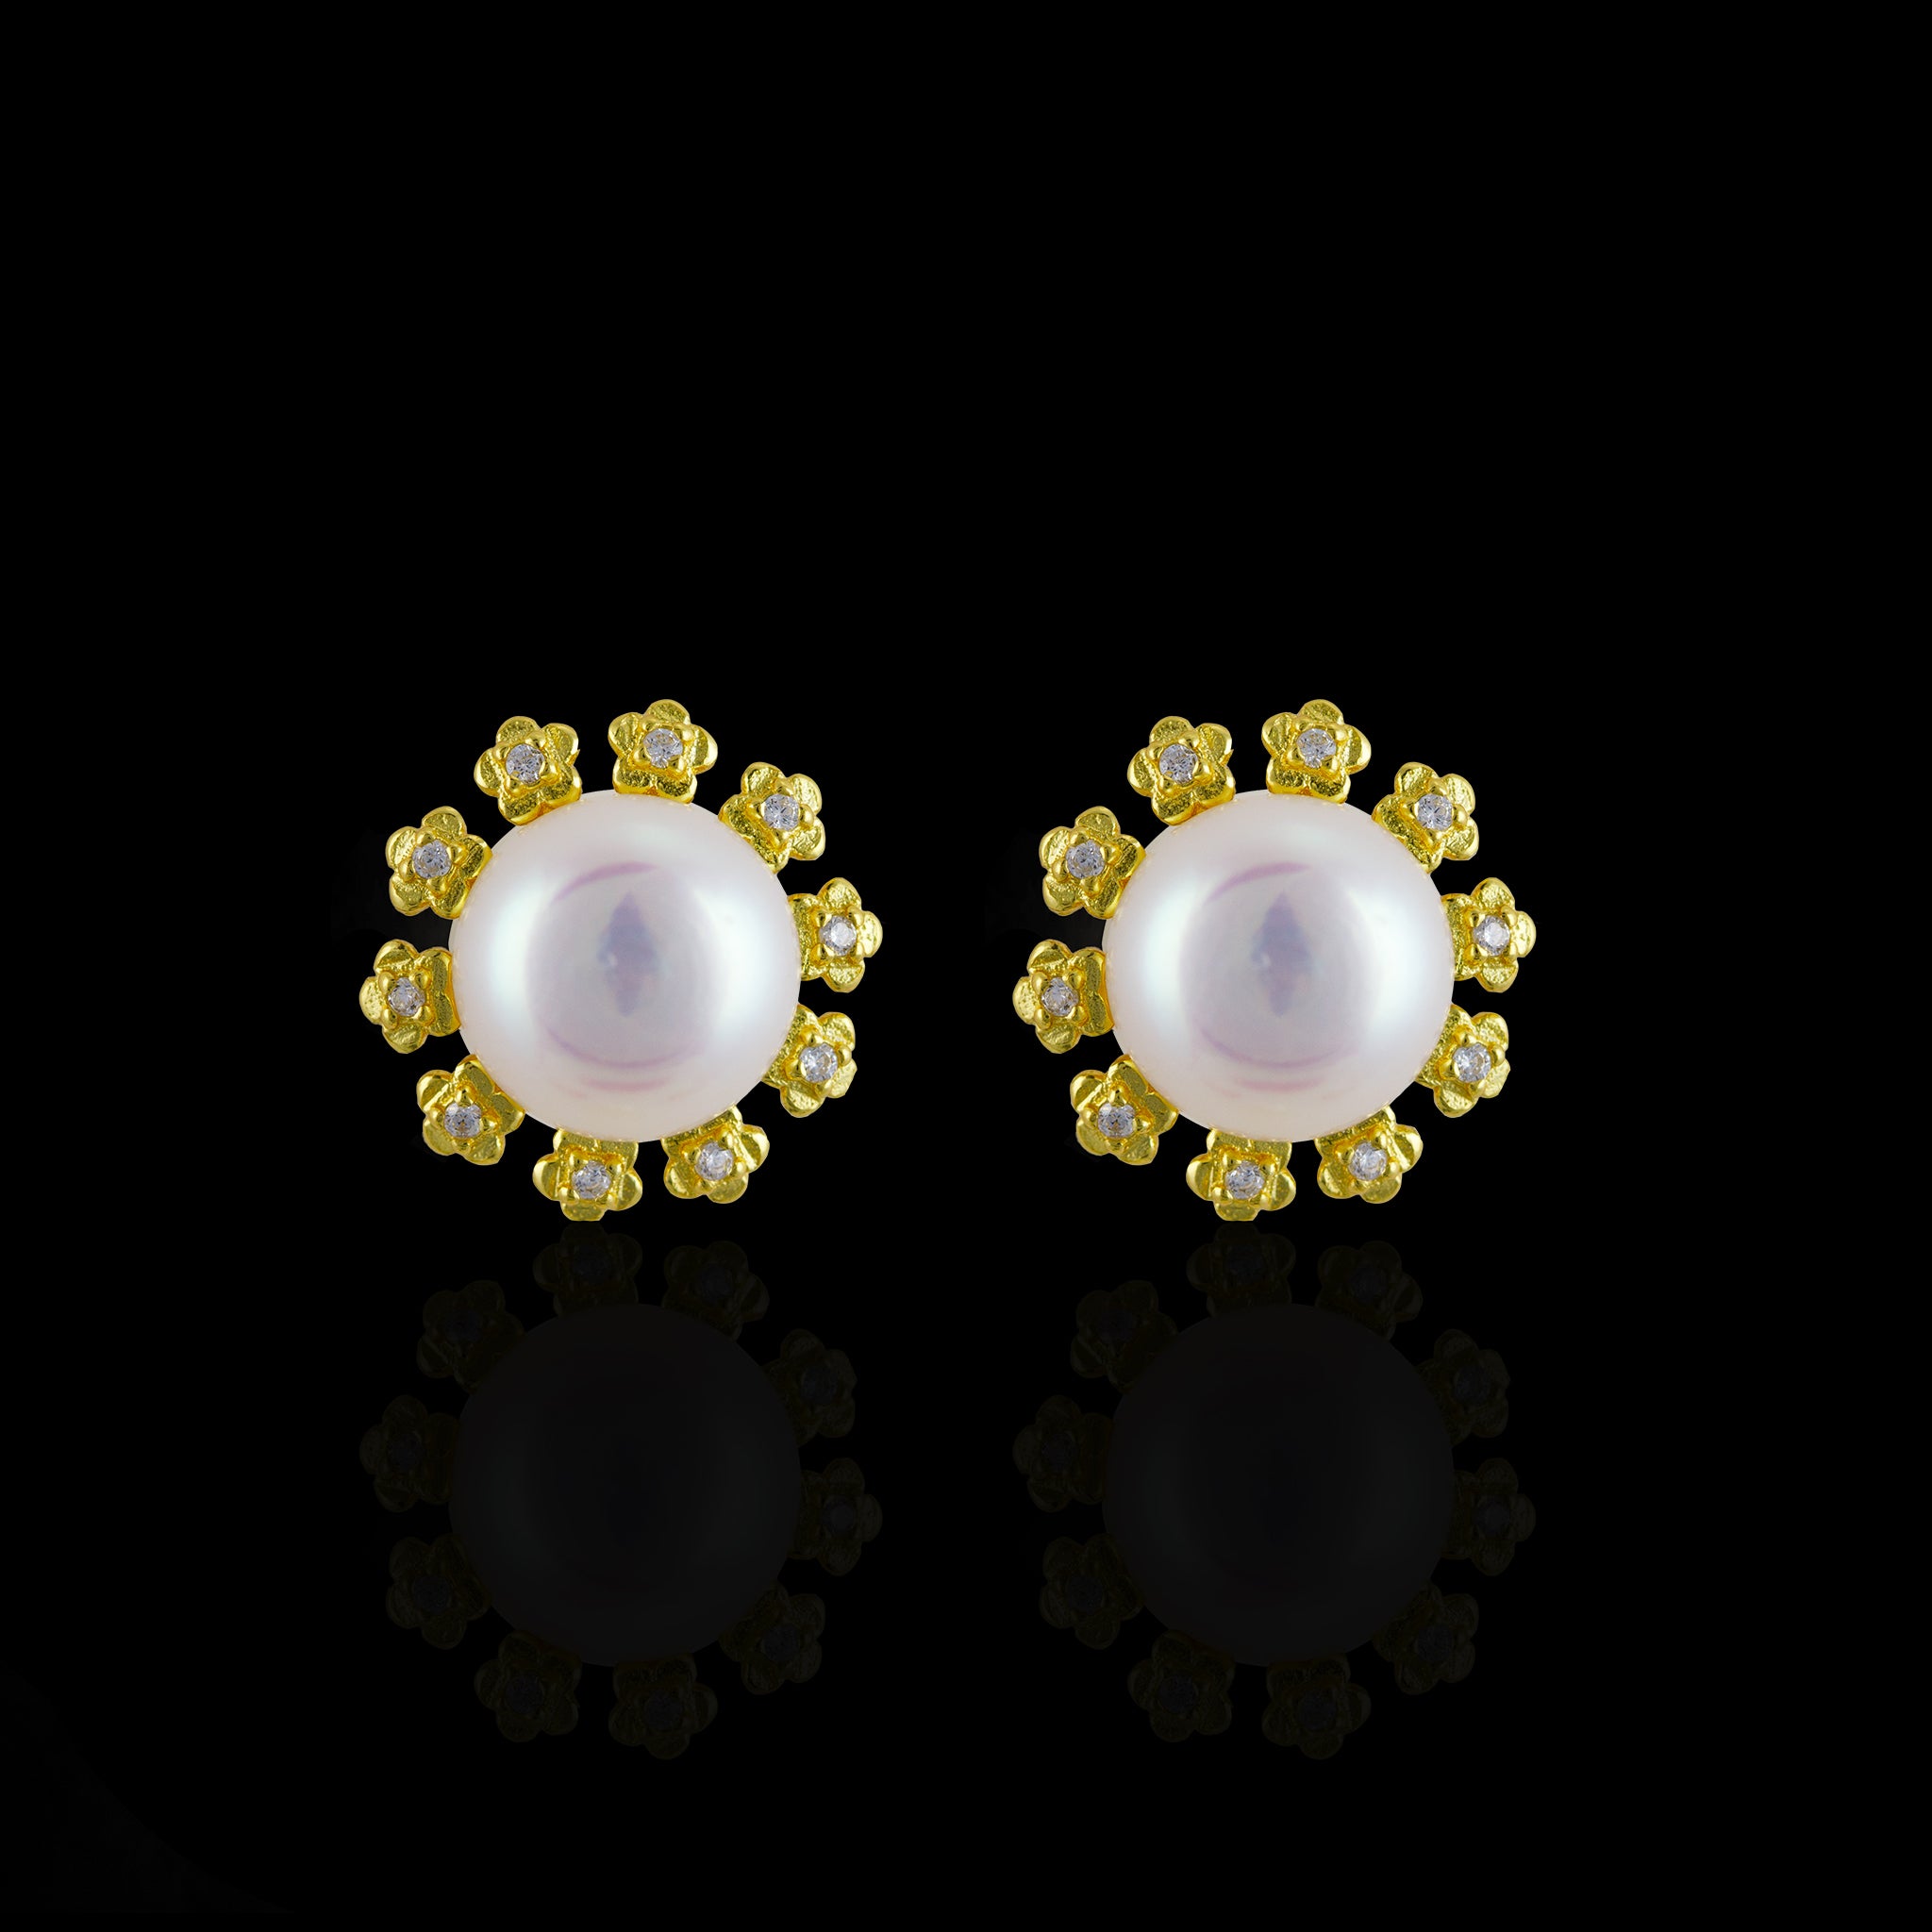 Freshwater Pearl Stud Earrings with Gemstone Accents in 14K Gold Mounting - L'Amour Pearls